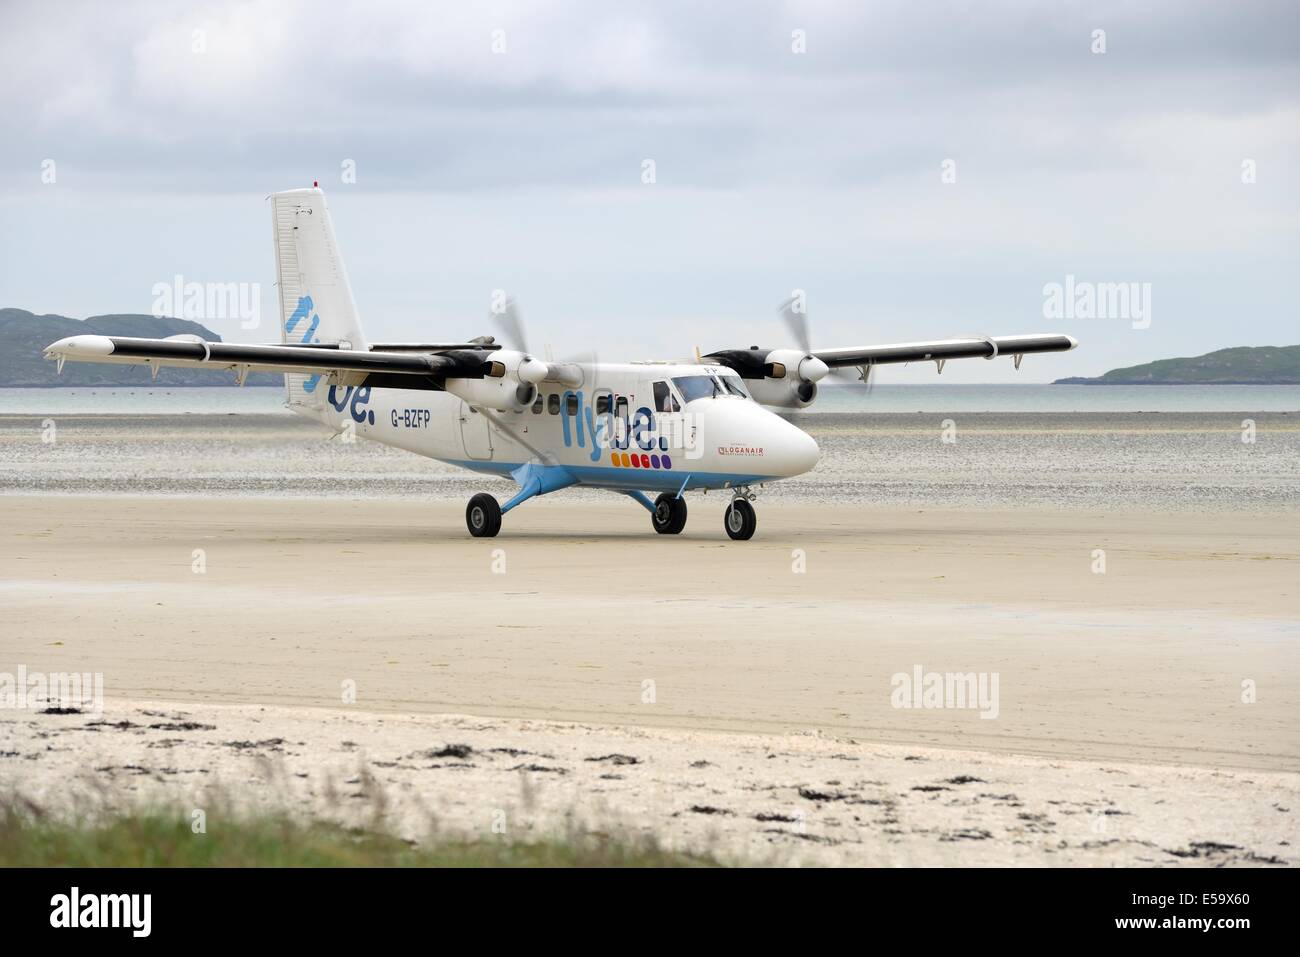 The scheduled flight from Glasgow lands at Barra beach airstrip in the Outer Hebrides, Scotland Stock Photo